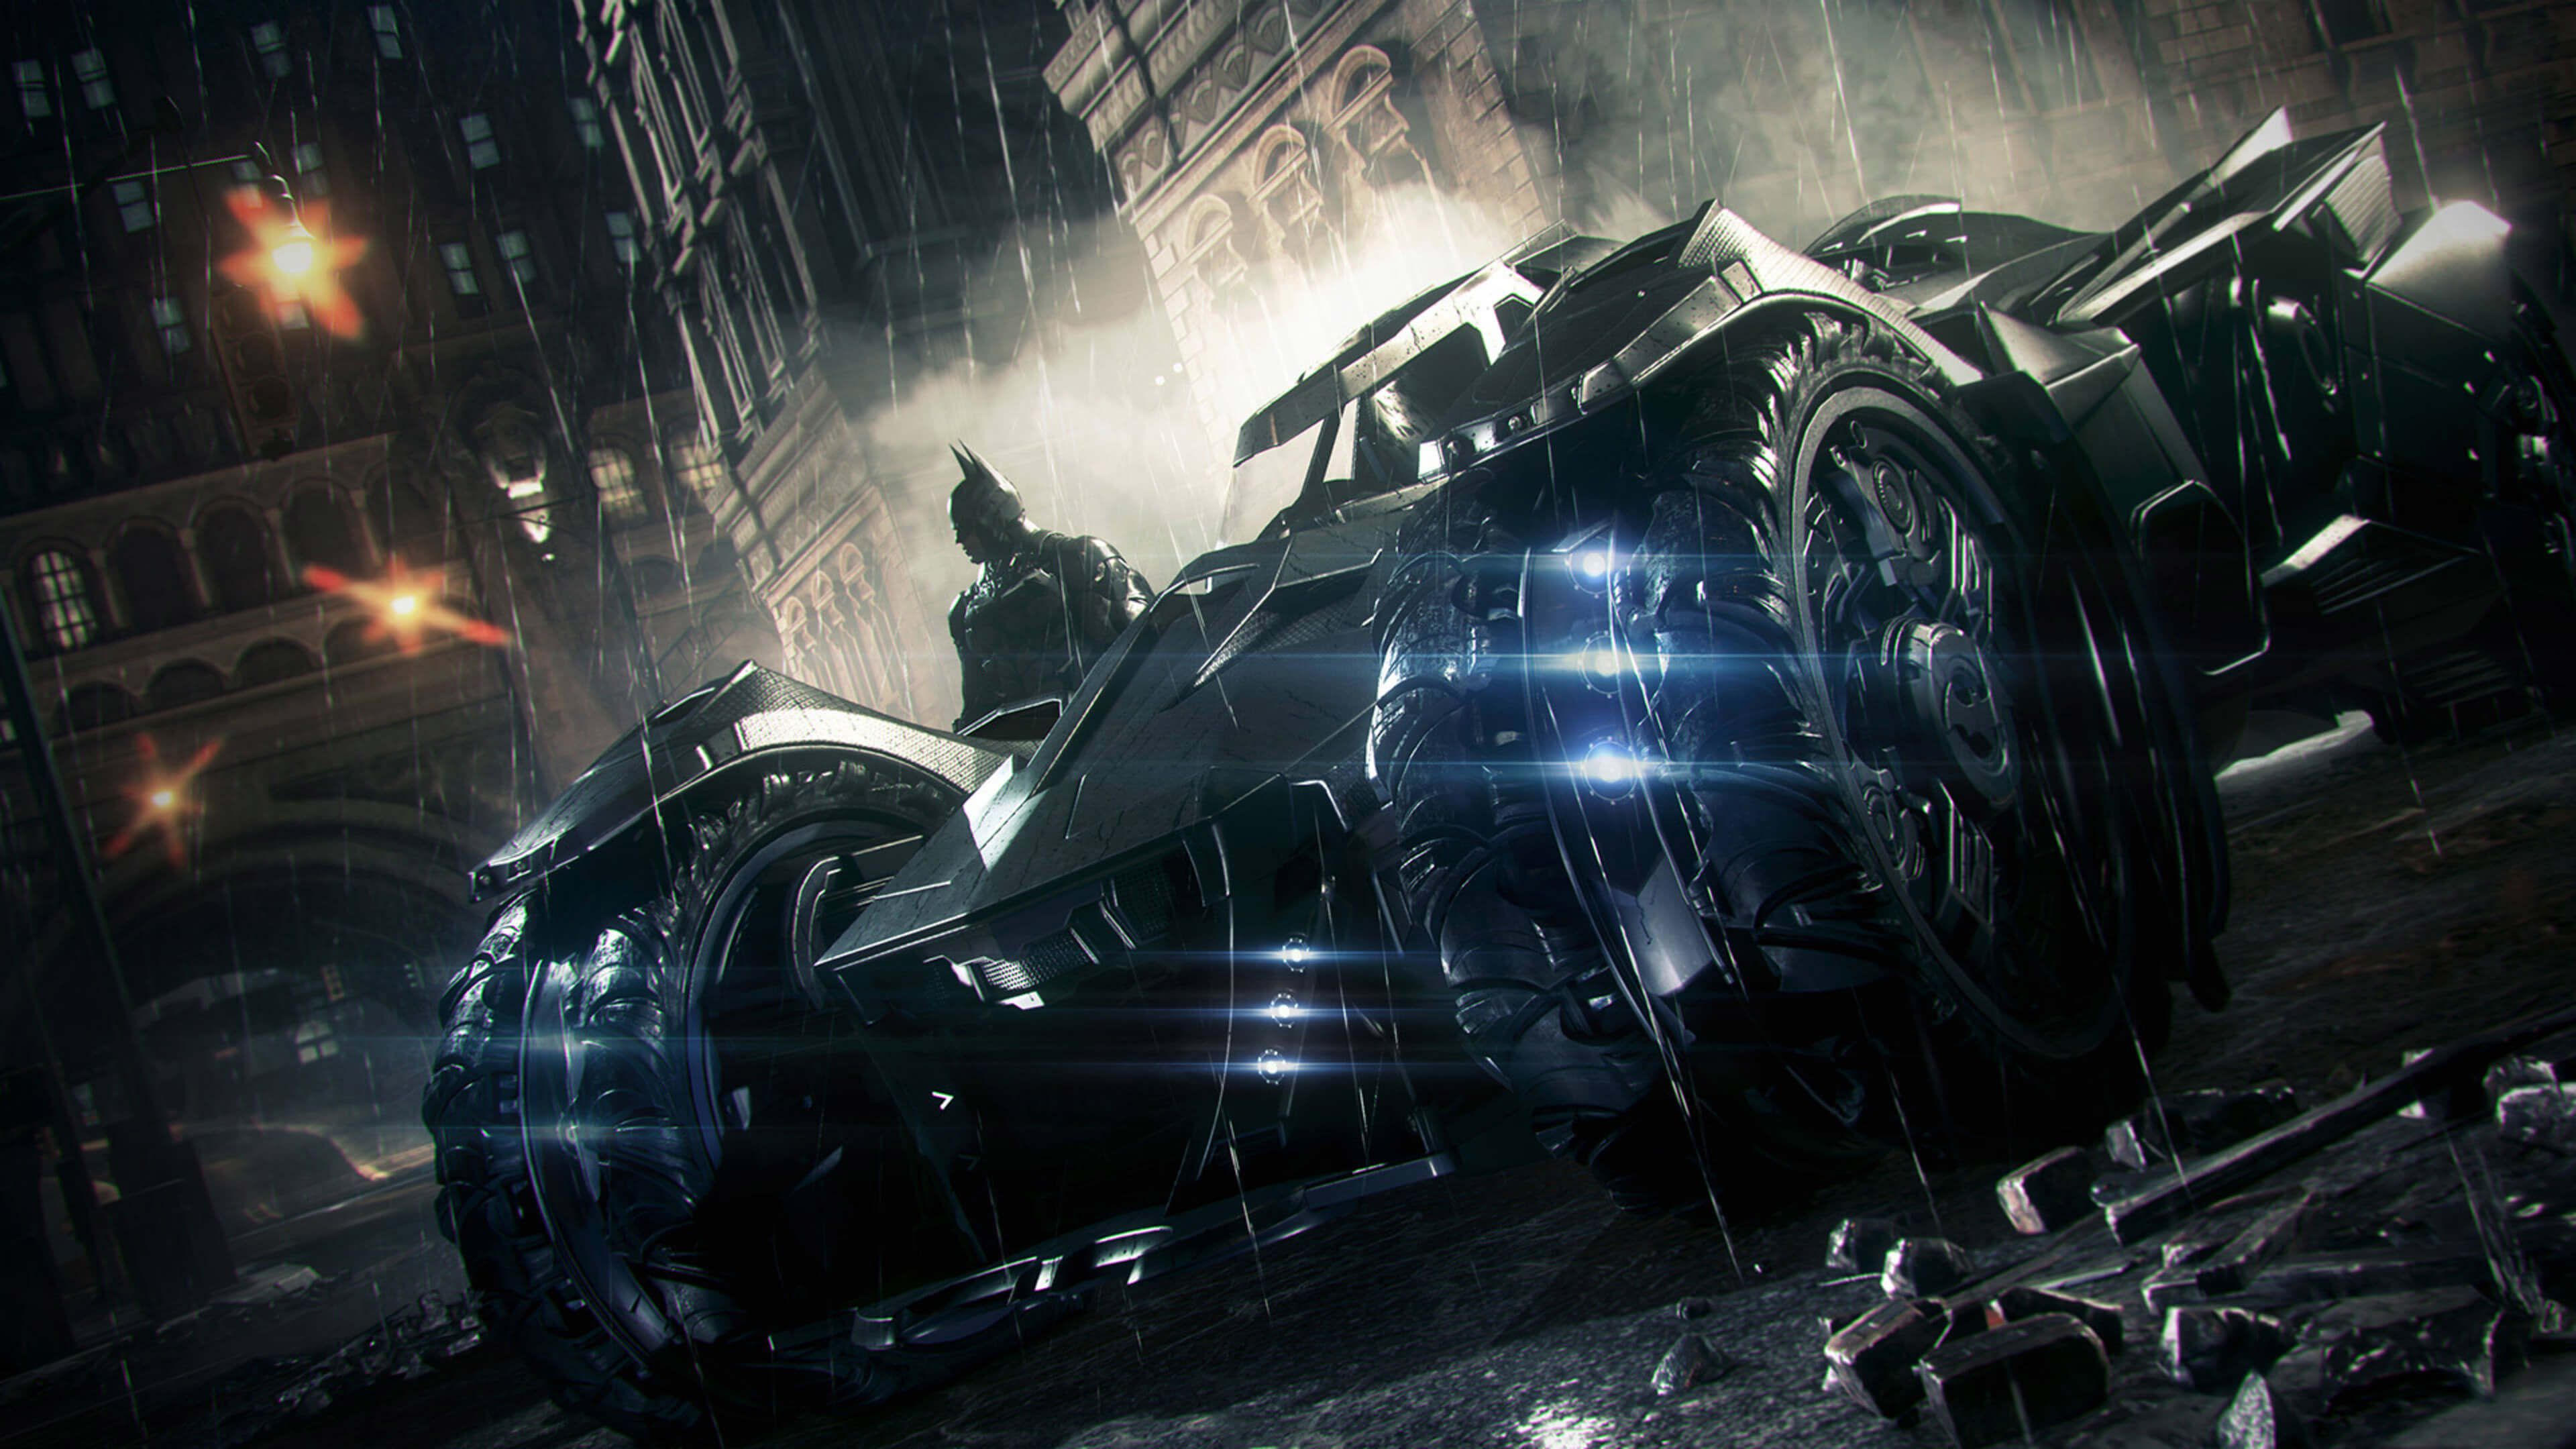 Batmobile 4K wallpaper for your desktop or mobile screen free and easy to download